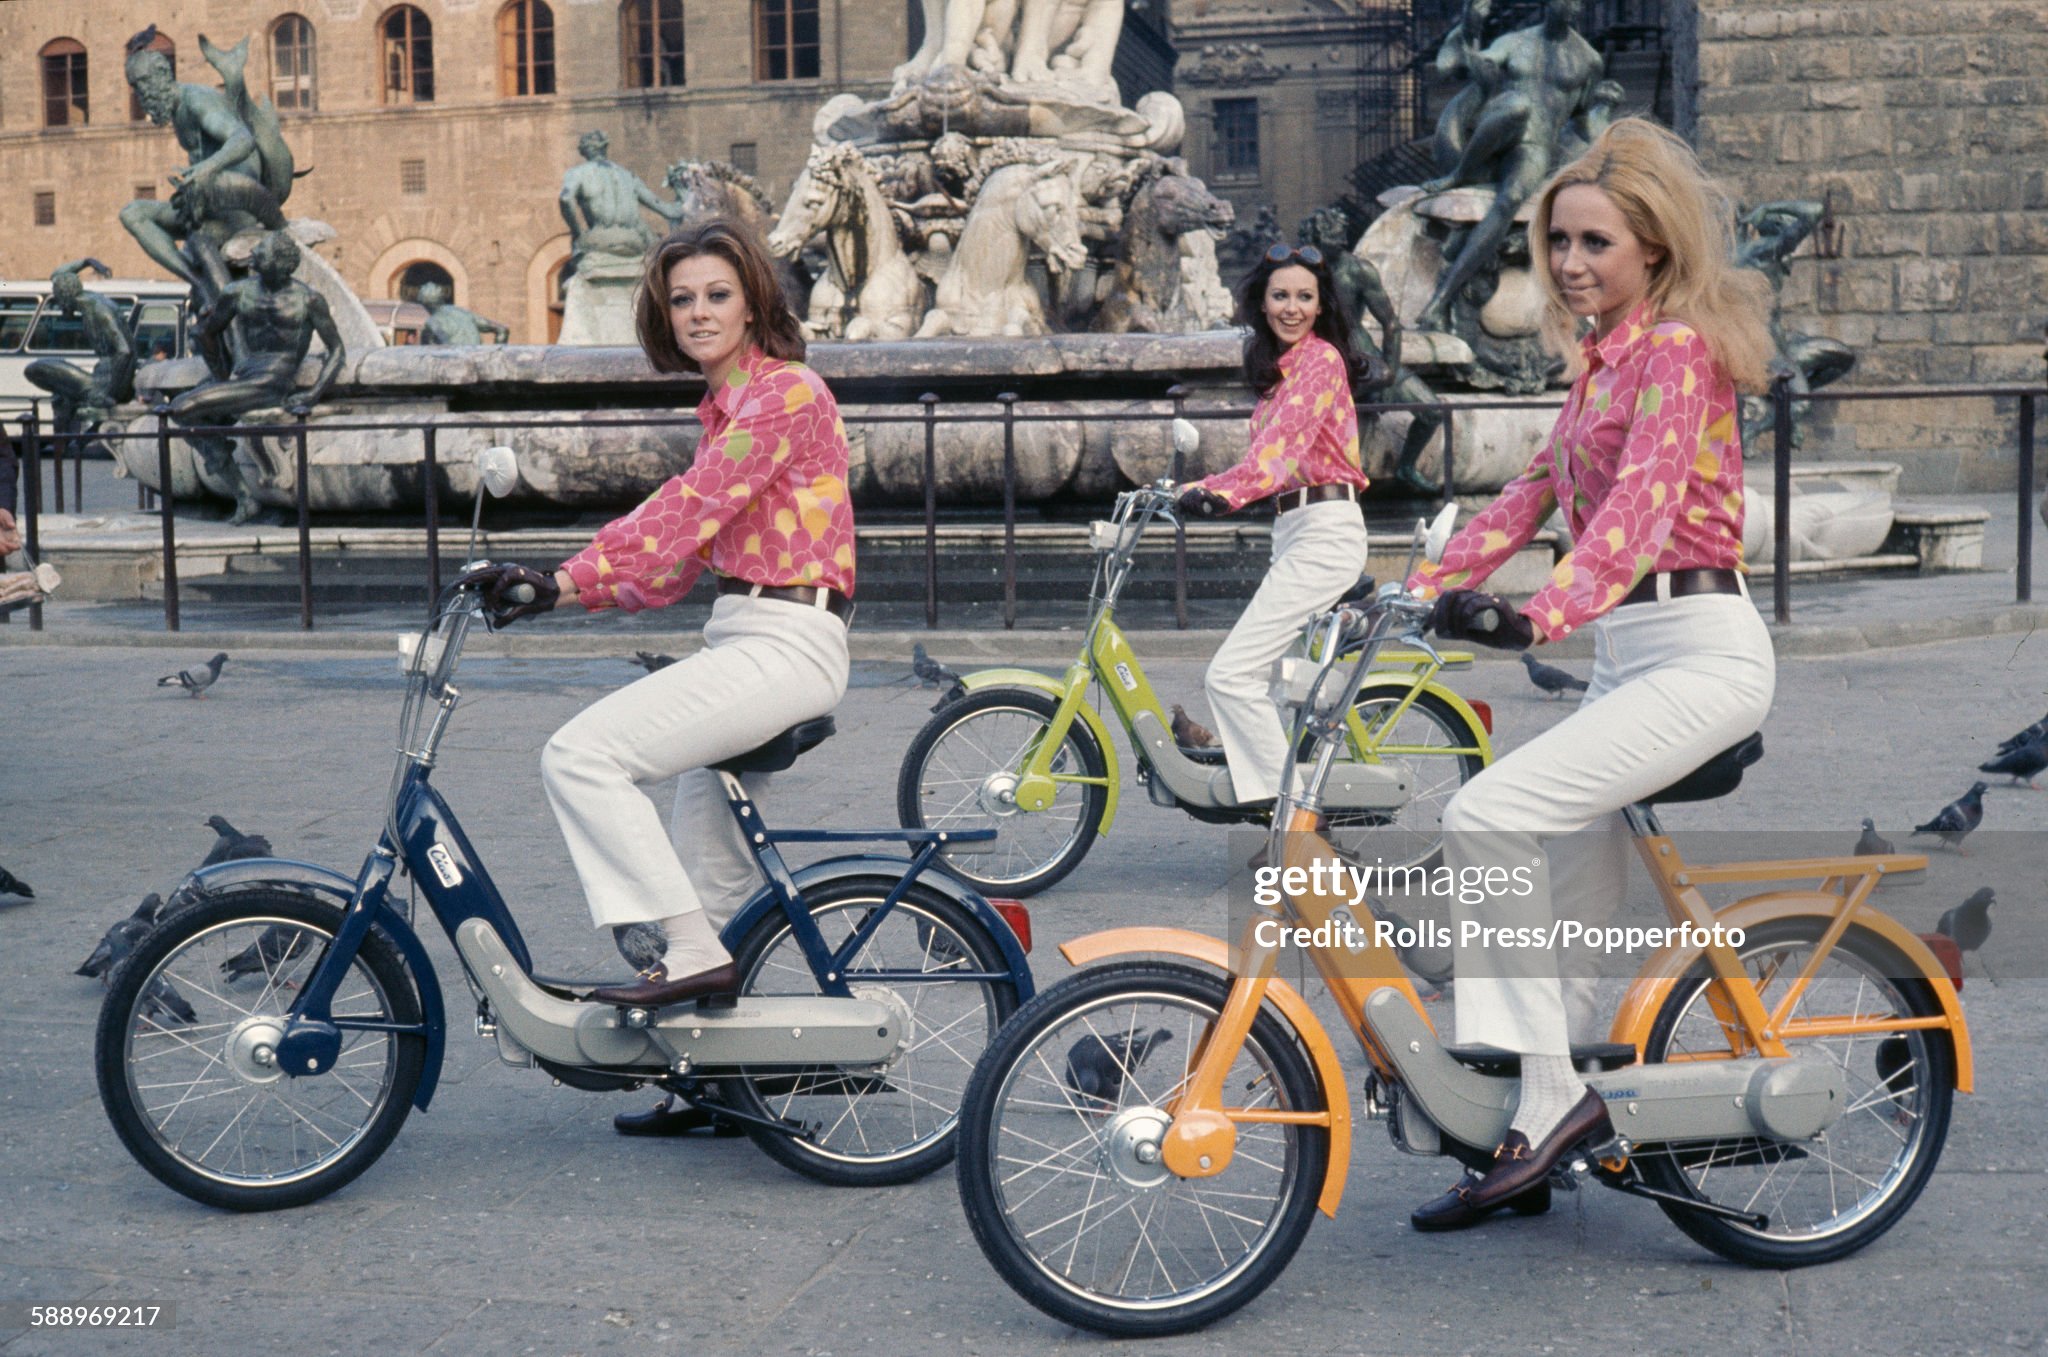 View of three female models wearing identical pink blouses and white trousers, pictured sitting on recently launched Piaggio Ciao mopeds in front of the Fountain of Neptune on the Piazza della Signoria in Florence, Italy, on 13th March 1968. 